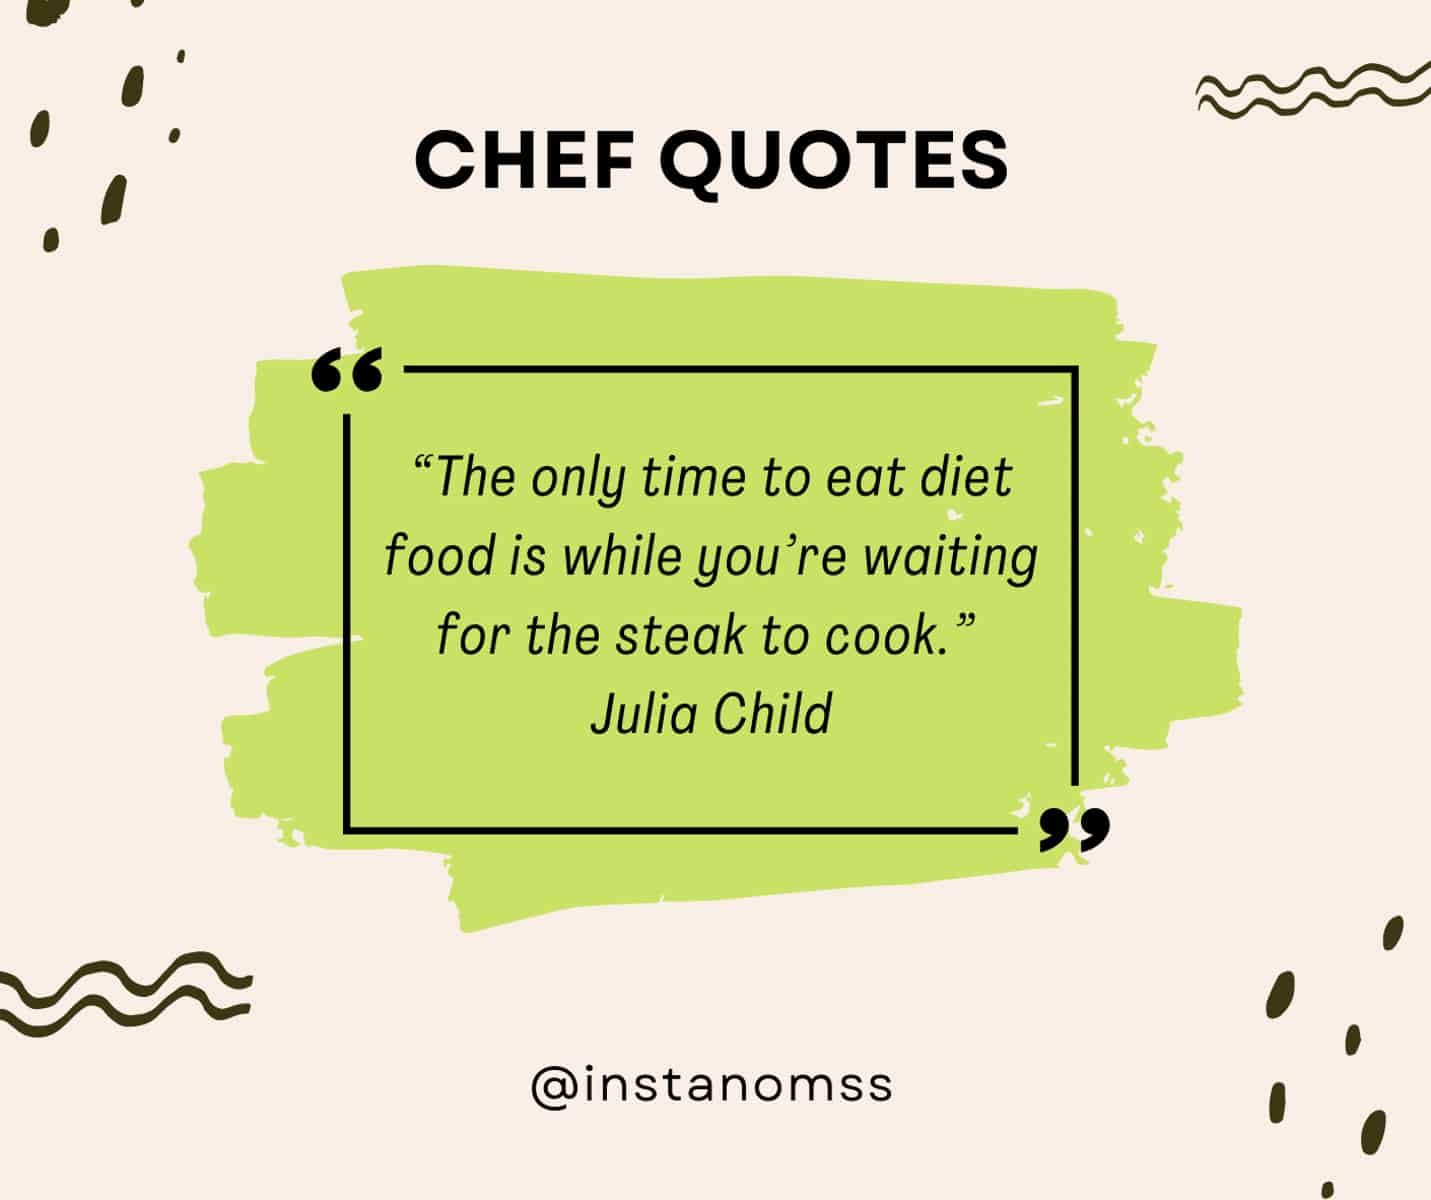 “The only time to eat diet food is while you’re waiting for the steak to cook.” Julia Child